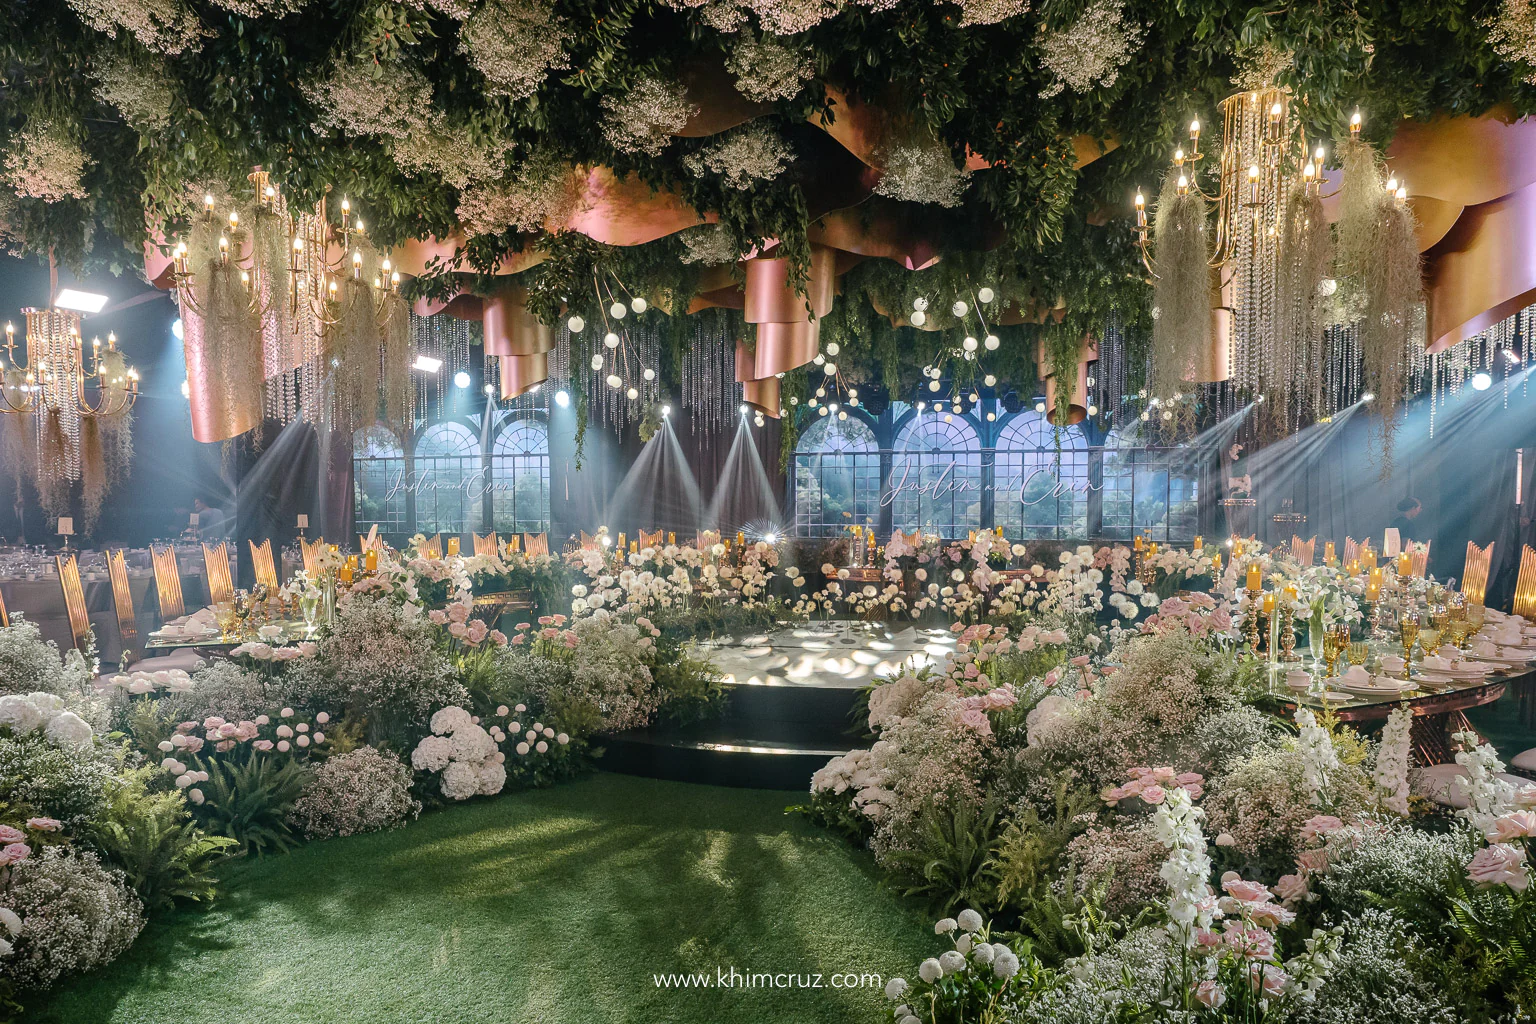 ethereal elements on a dreamy conservatory-inspired wedding reception by event designer Khim Cruz